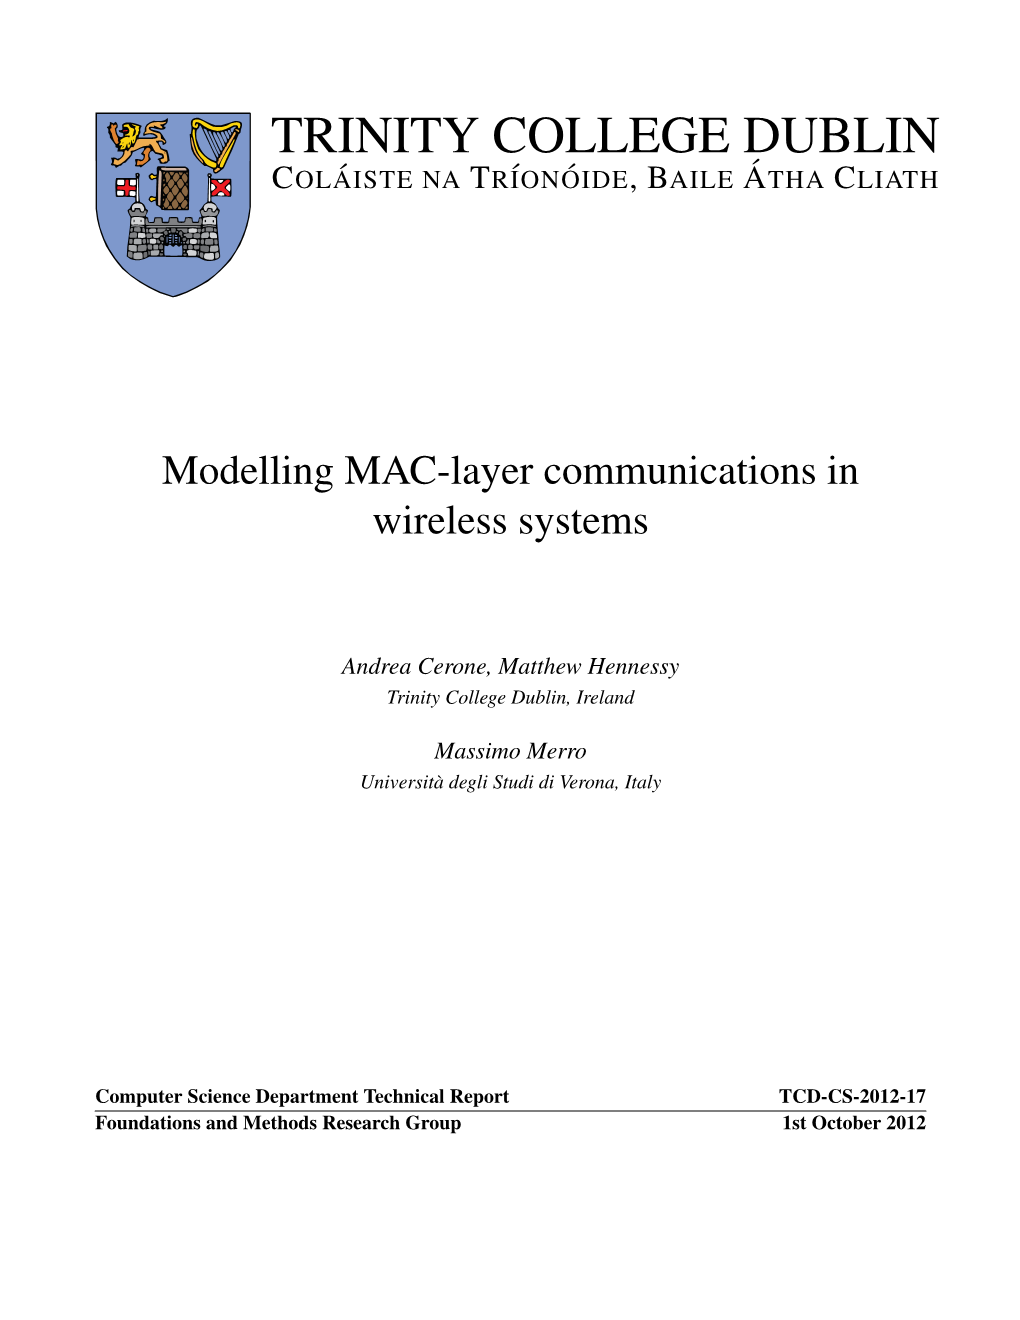 Technical Report TCD-CS-2012-17 Foundations and Methods Research Group 1St October 2012 Modelling MAC-Layer Communications in Wireless Systems